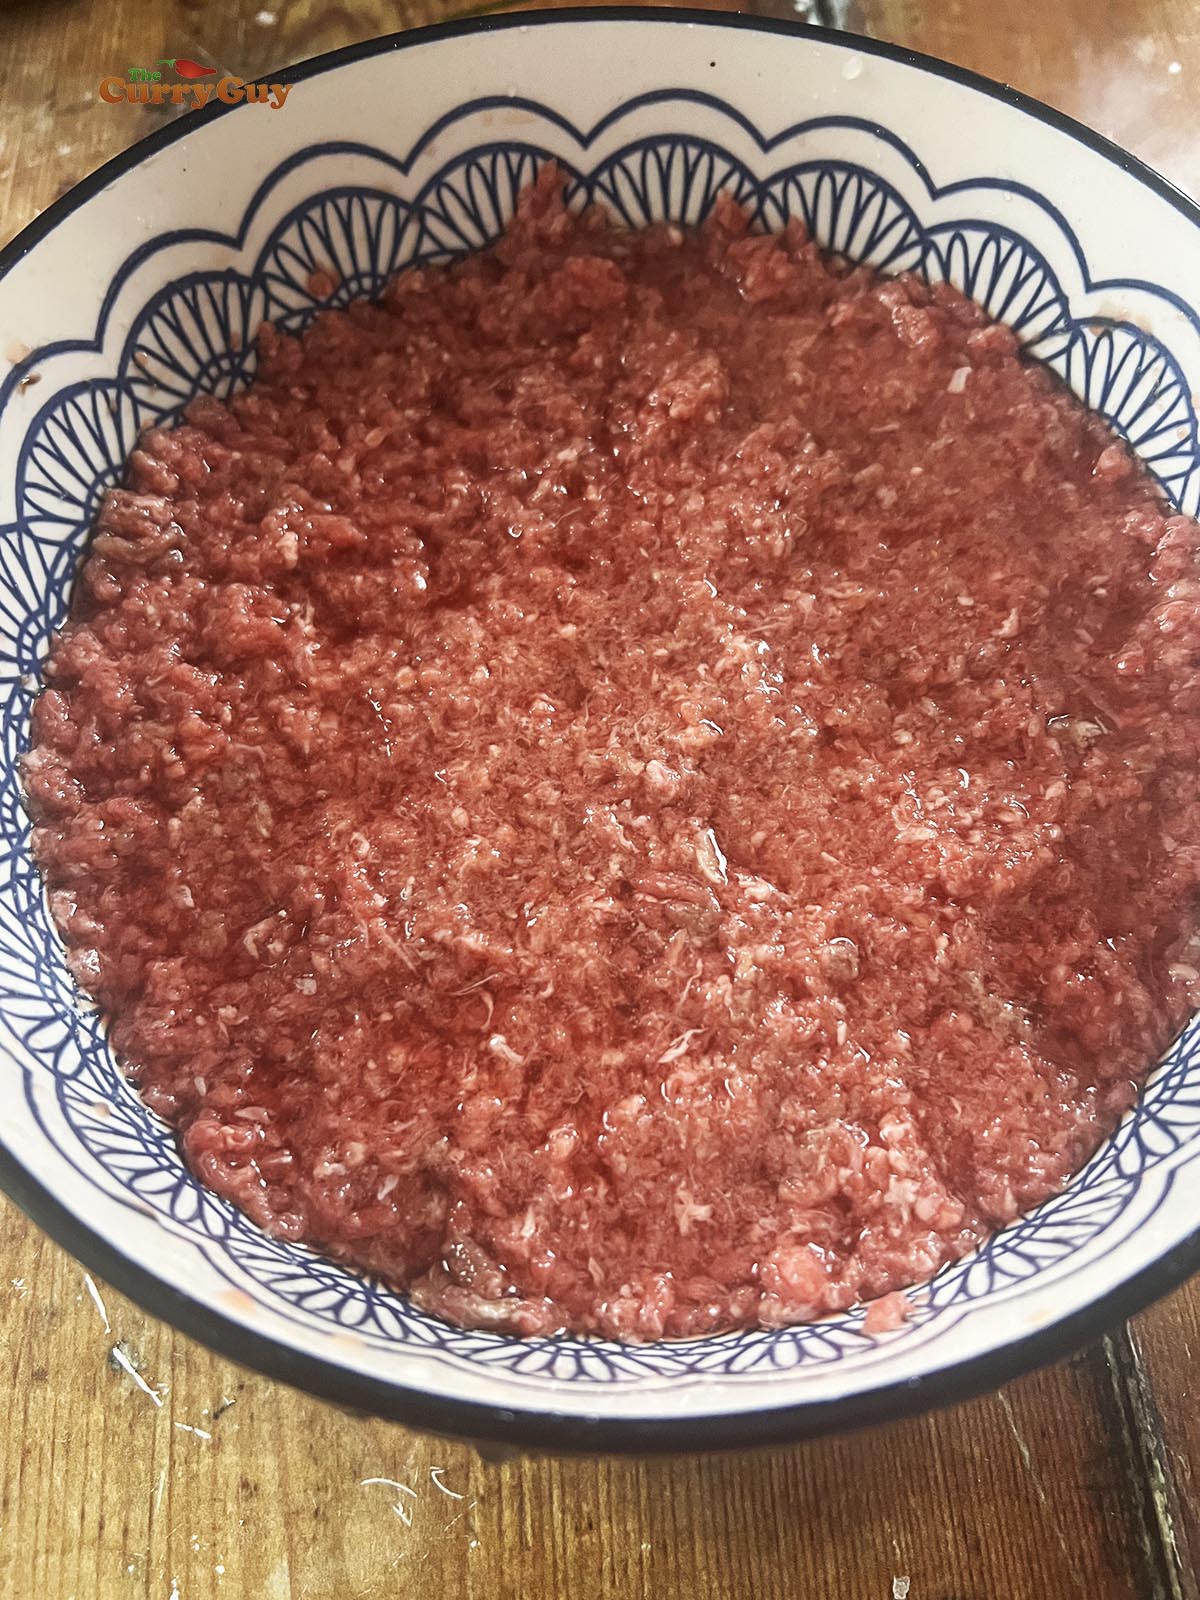 Soaking beef in water in a mixing bowl.